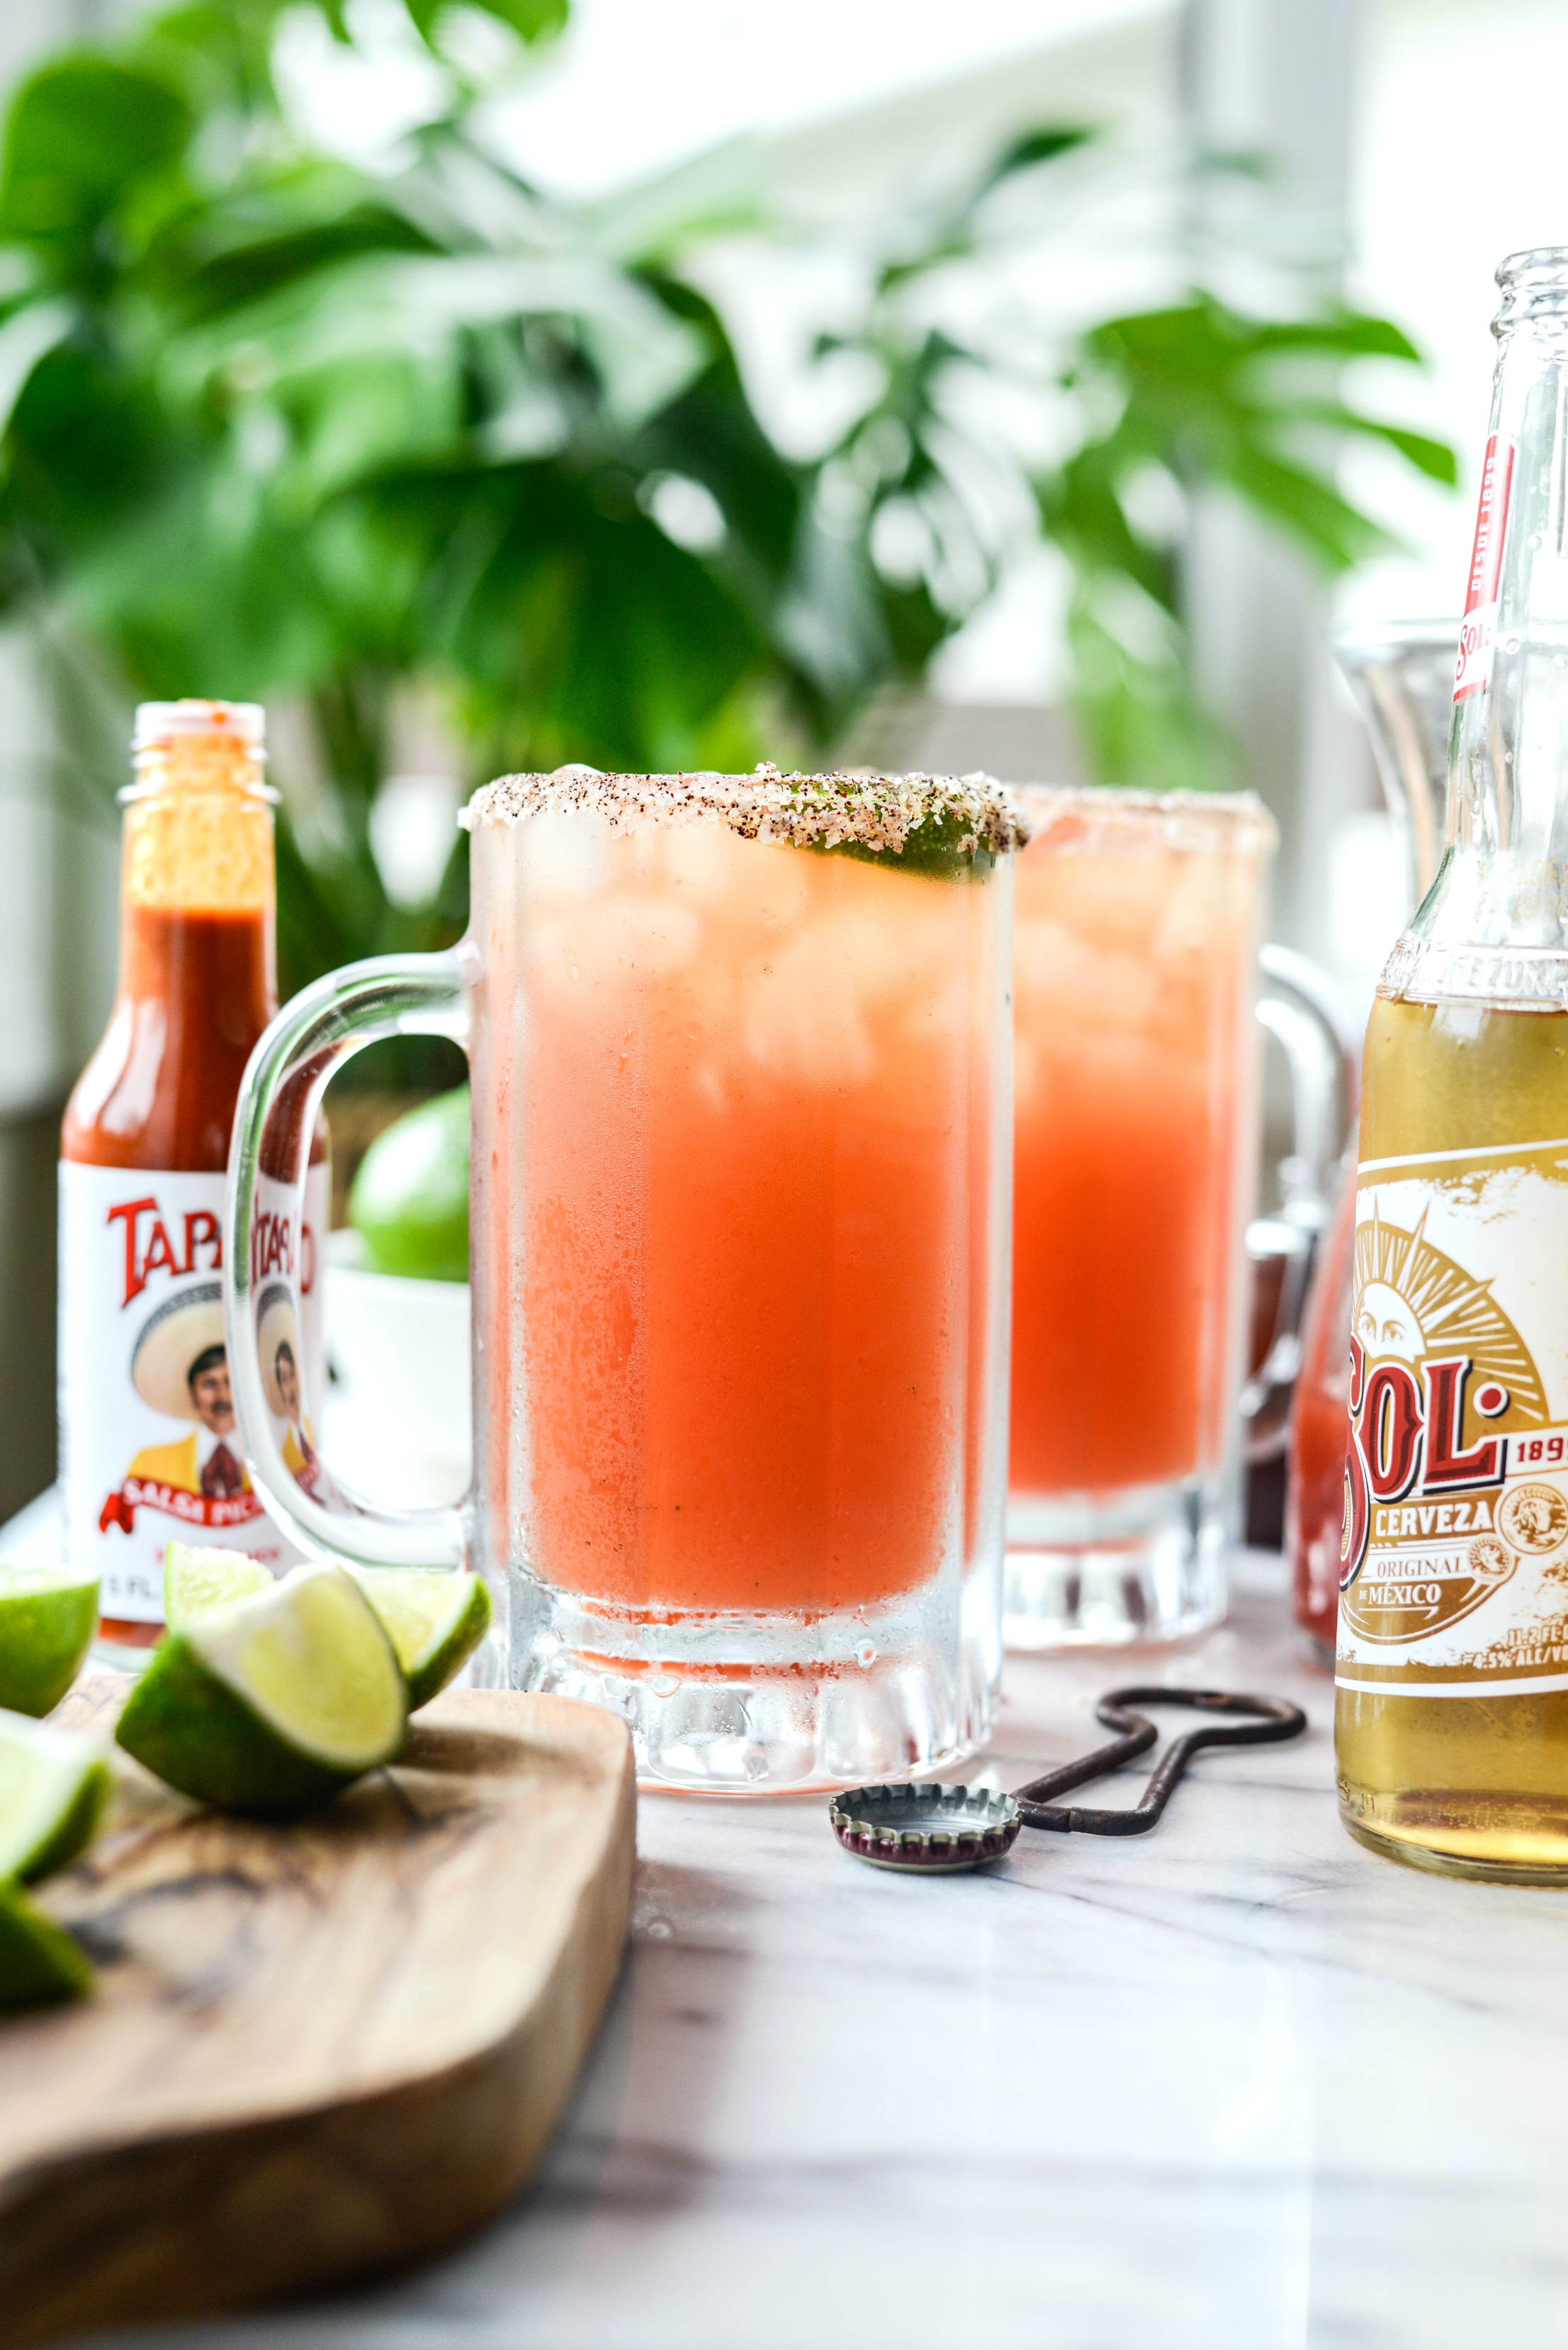 https://www.simplyscratch.com/wp-content/uploads/2019/05/Mexican-Michelada-Recipe-l-SimplyScratch.com-adultbeverage-cincodemayo-beer-drink-mexican-18.jpg